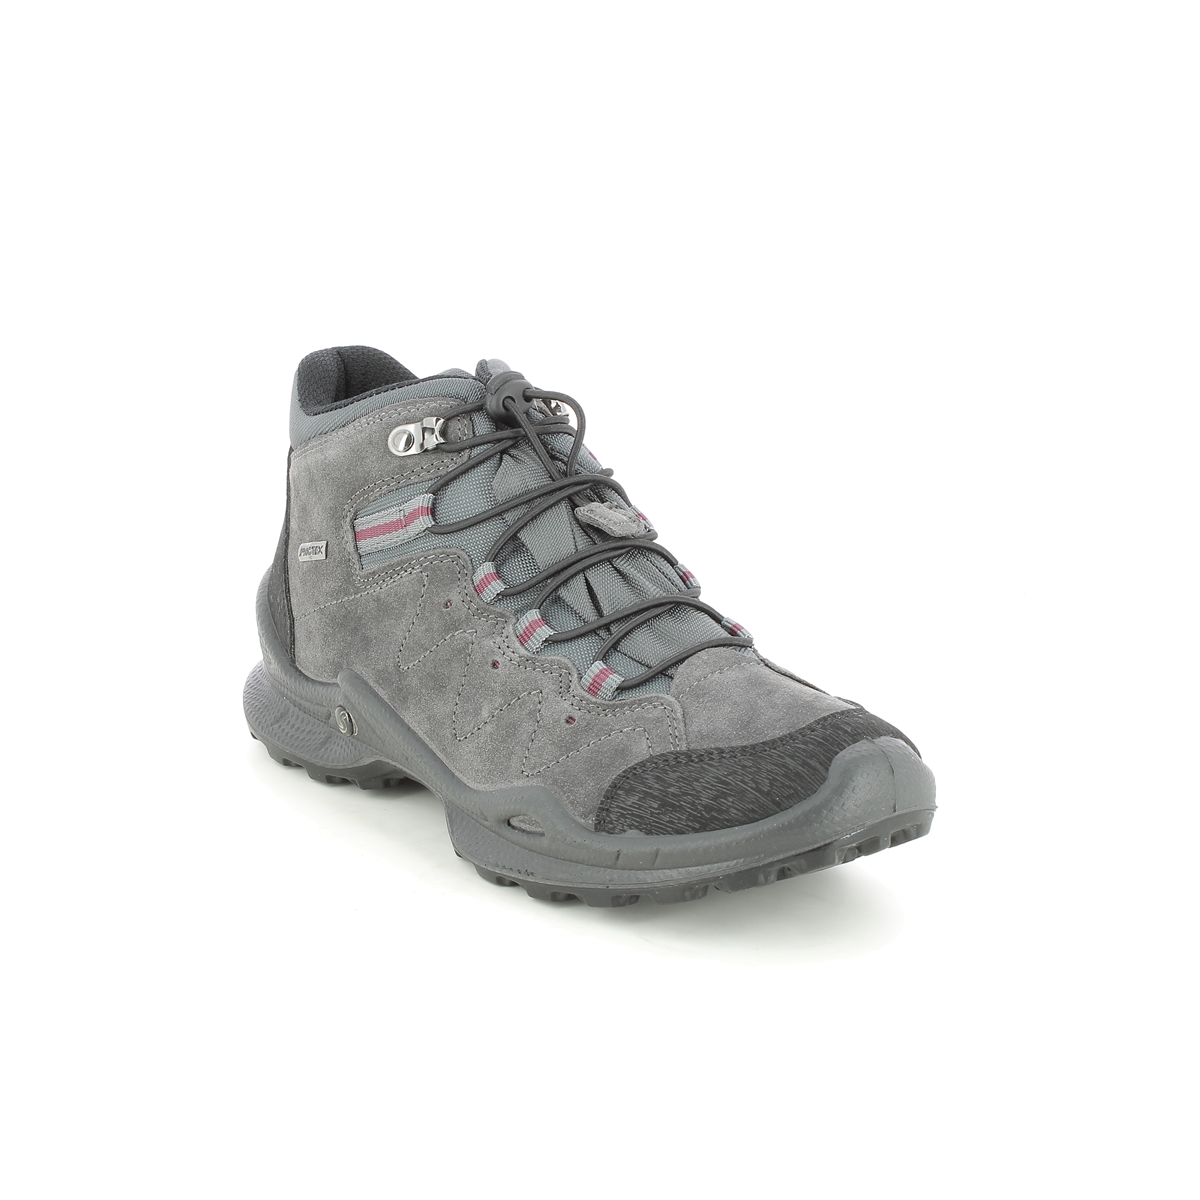 Imac Foxy   Boot Tex Grey Suede Womens Walking Boots 8819-7104018 In Size 40 In Plain Grey Suede